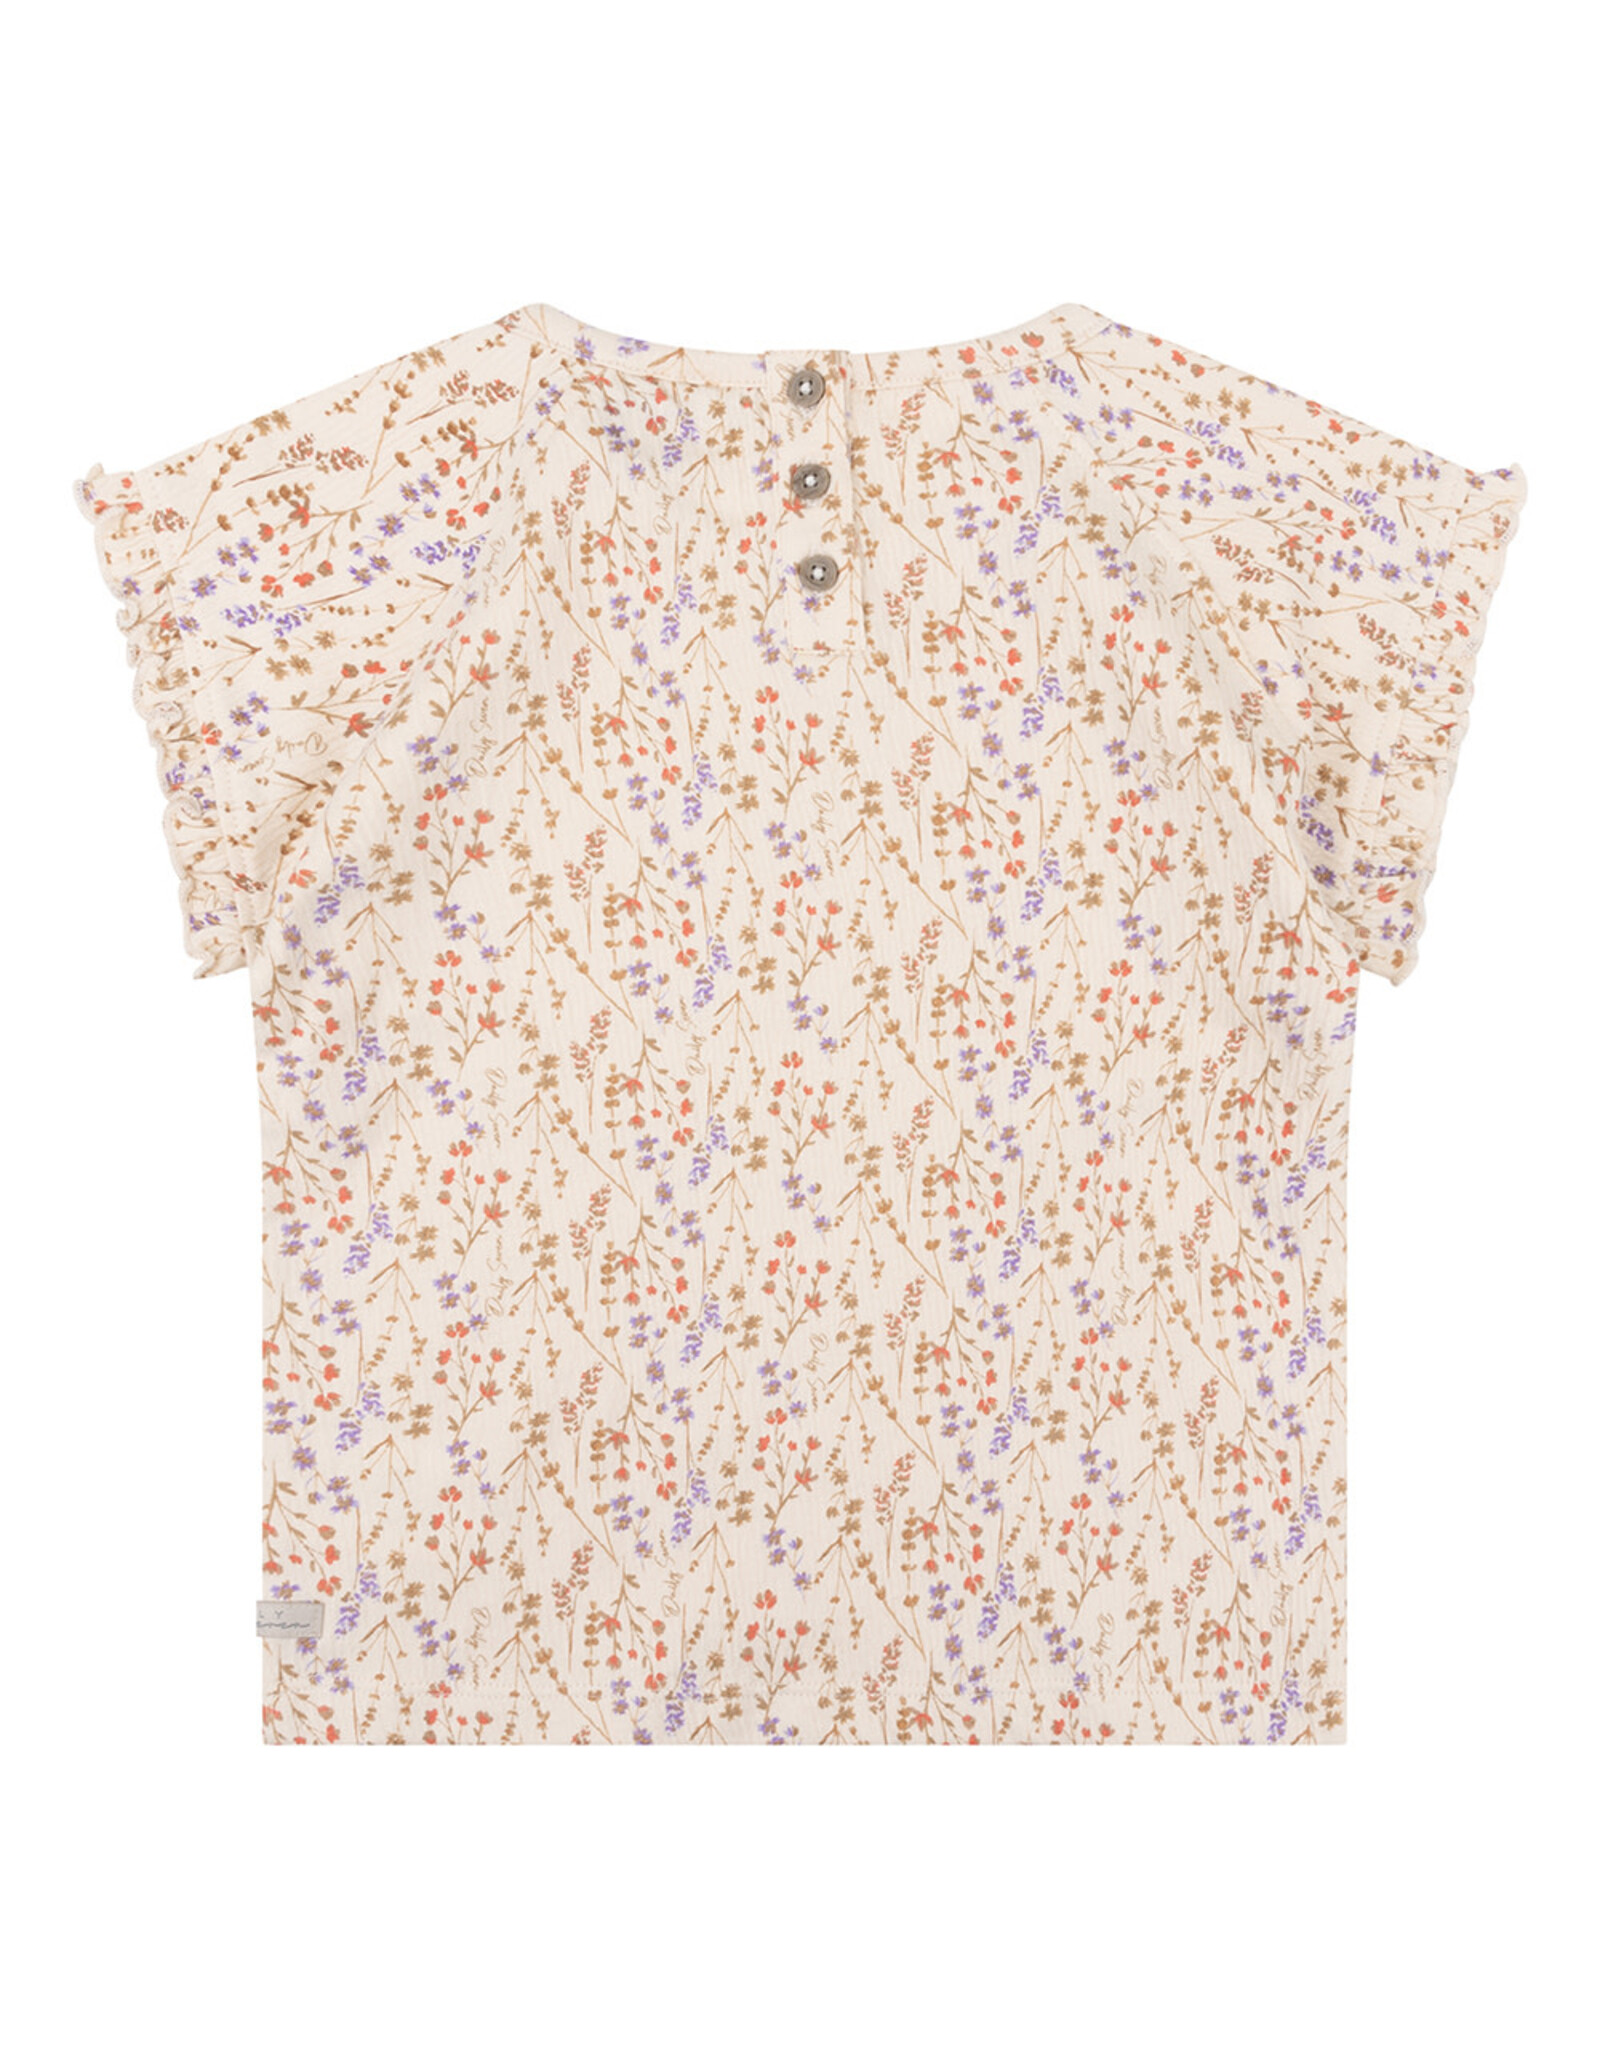 Daily7 Organic T-shirt Structure Mille Fleur Sandshell